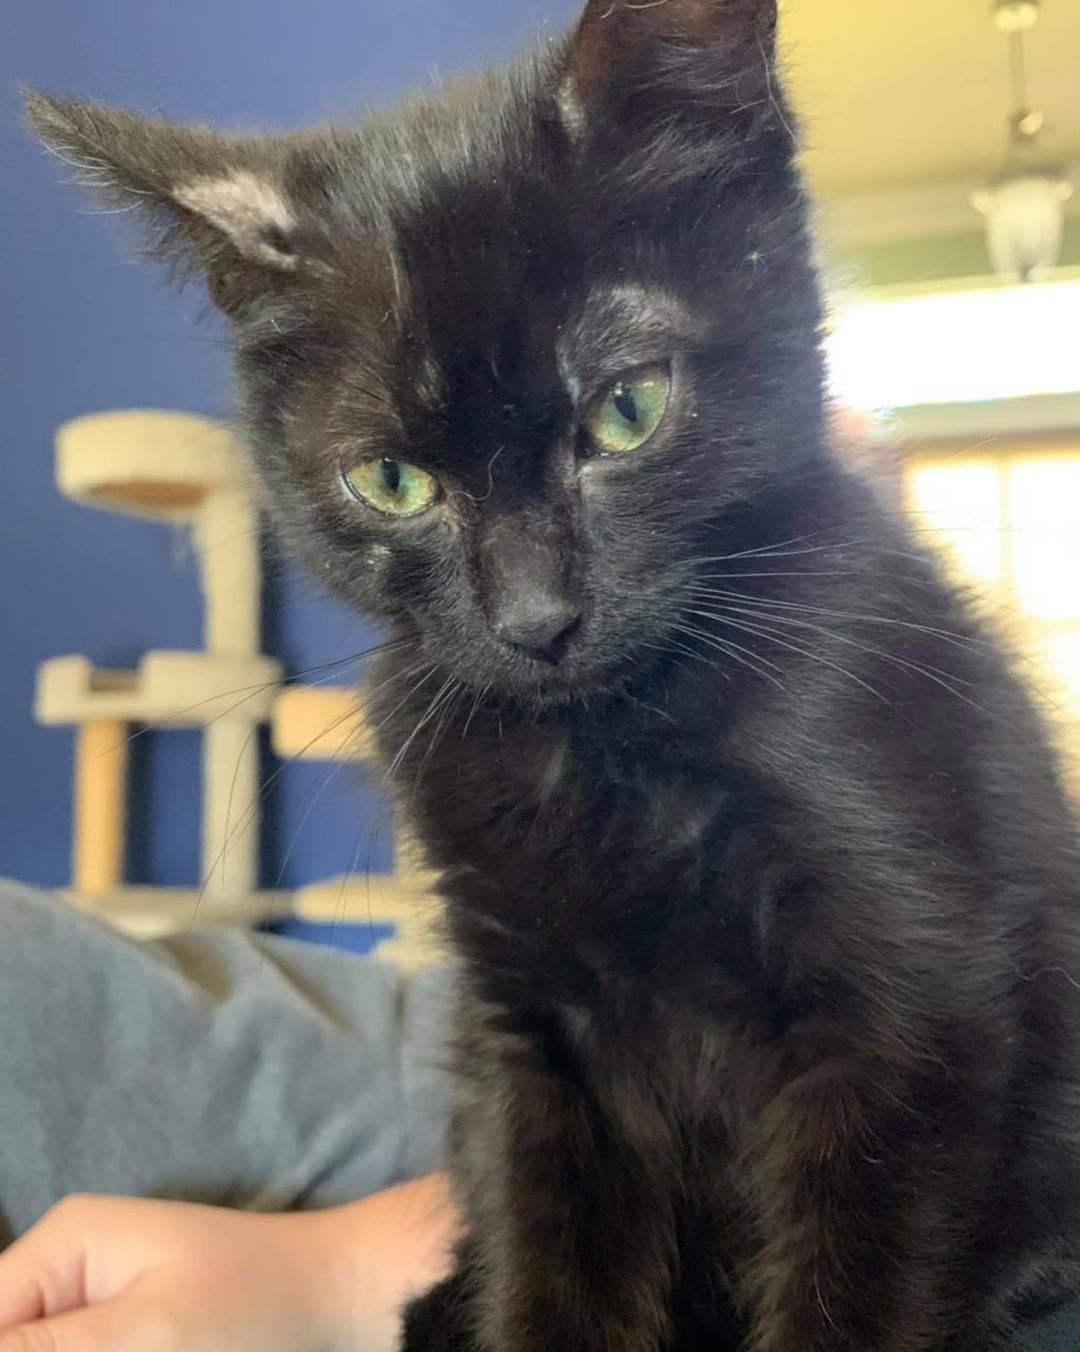 Our eighth black kitty for November is Turtle! He was pulled from a kill shelter with his mom and siblings and taken into foster care. He is a super loving boy who wants to do nothing but snuggle with his foster mom 😻 The pictures don’t do justice to how fuzzy he is! He is good with cats and dogs. Turtle is 3 months old, up to date on vaccines and FIV/FELV negative. To put in an application click on the link below.

https://www.sbanimalrescue.org/adopt